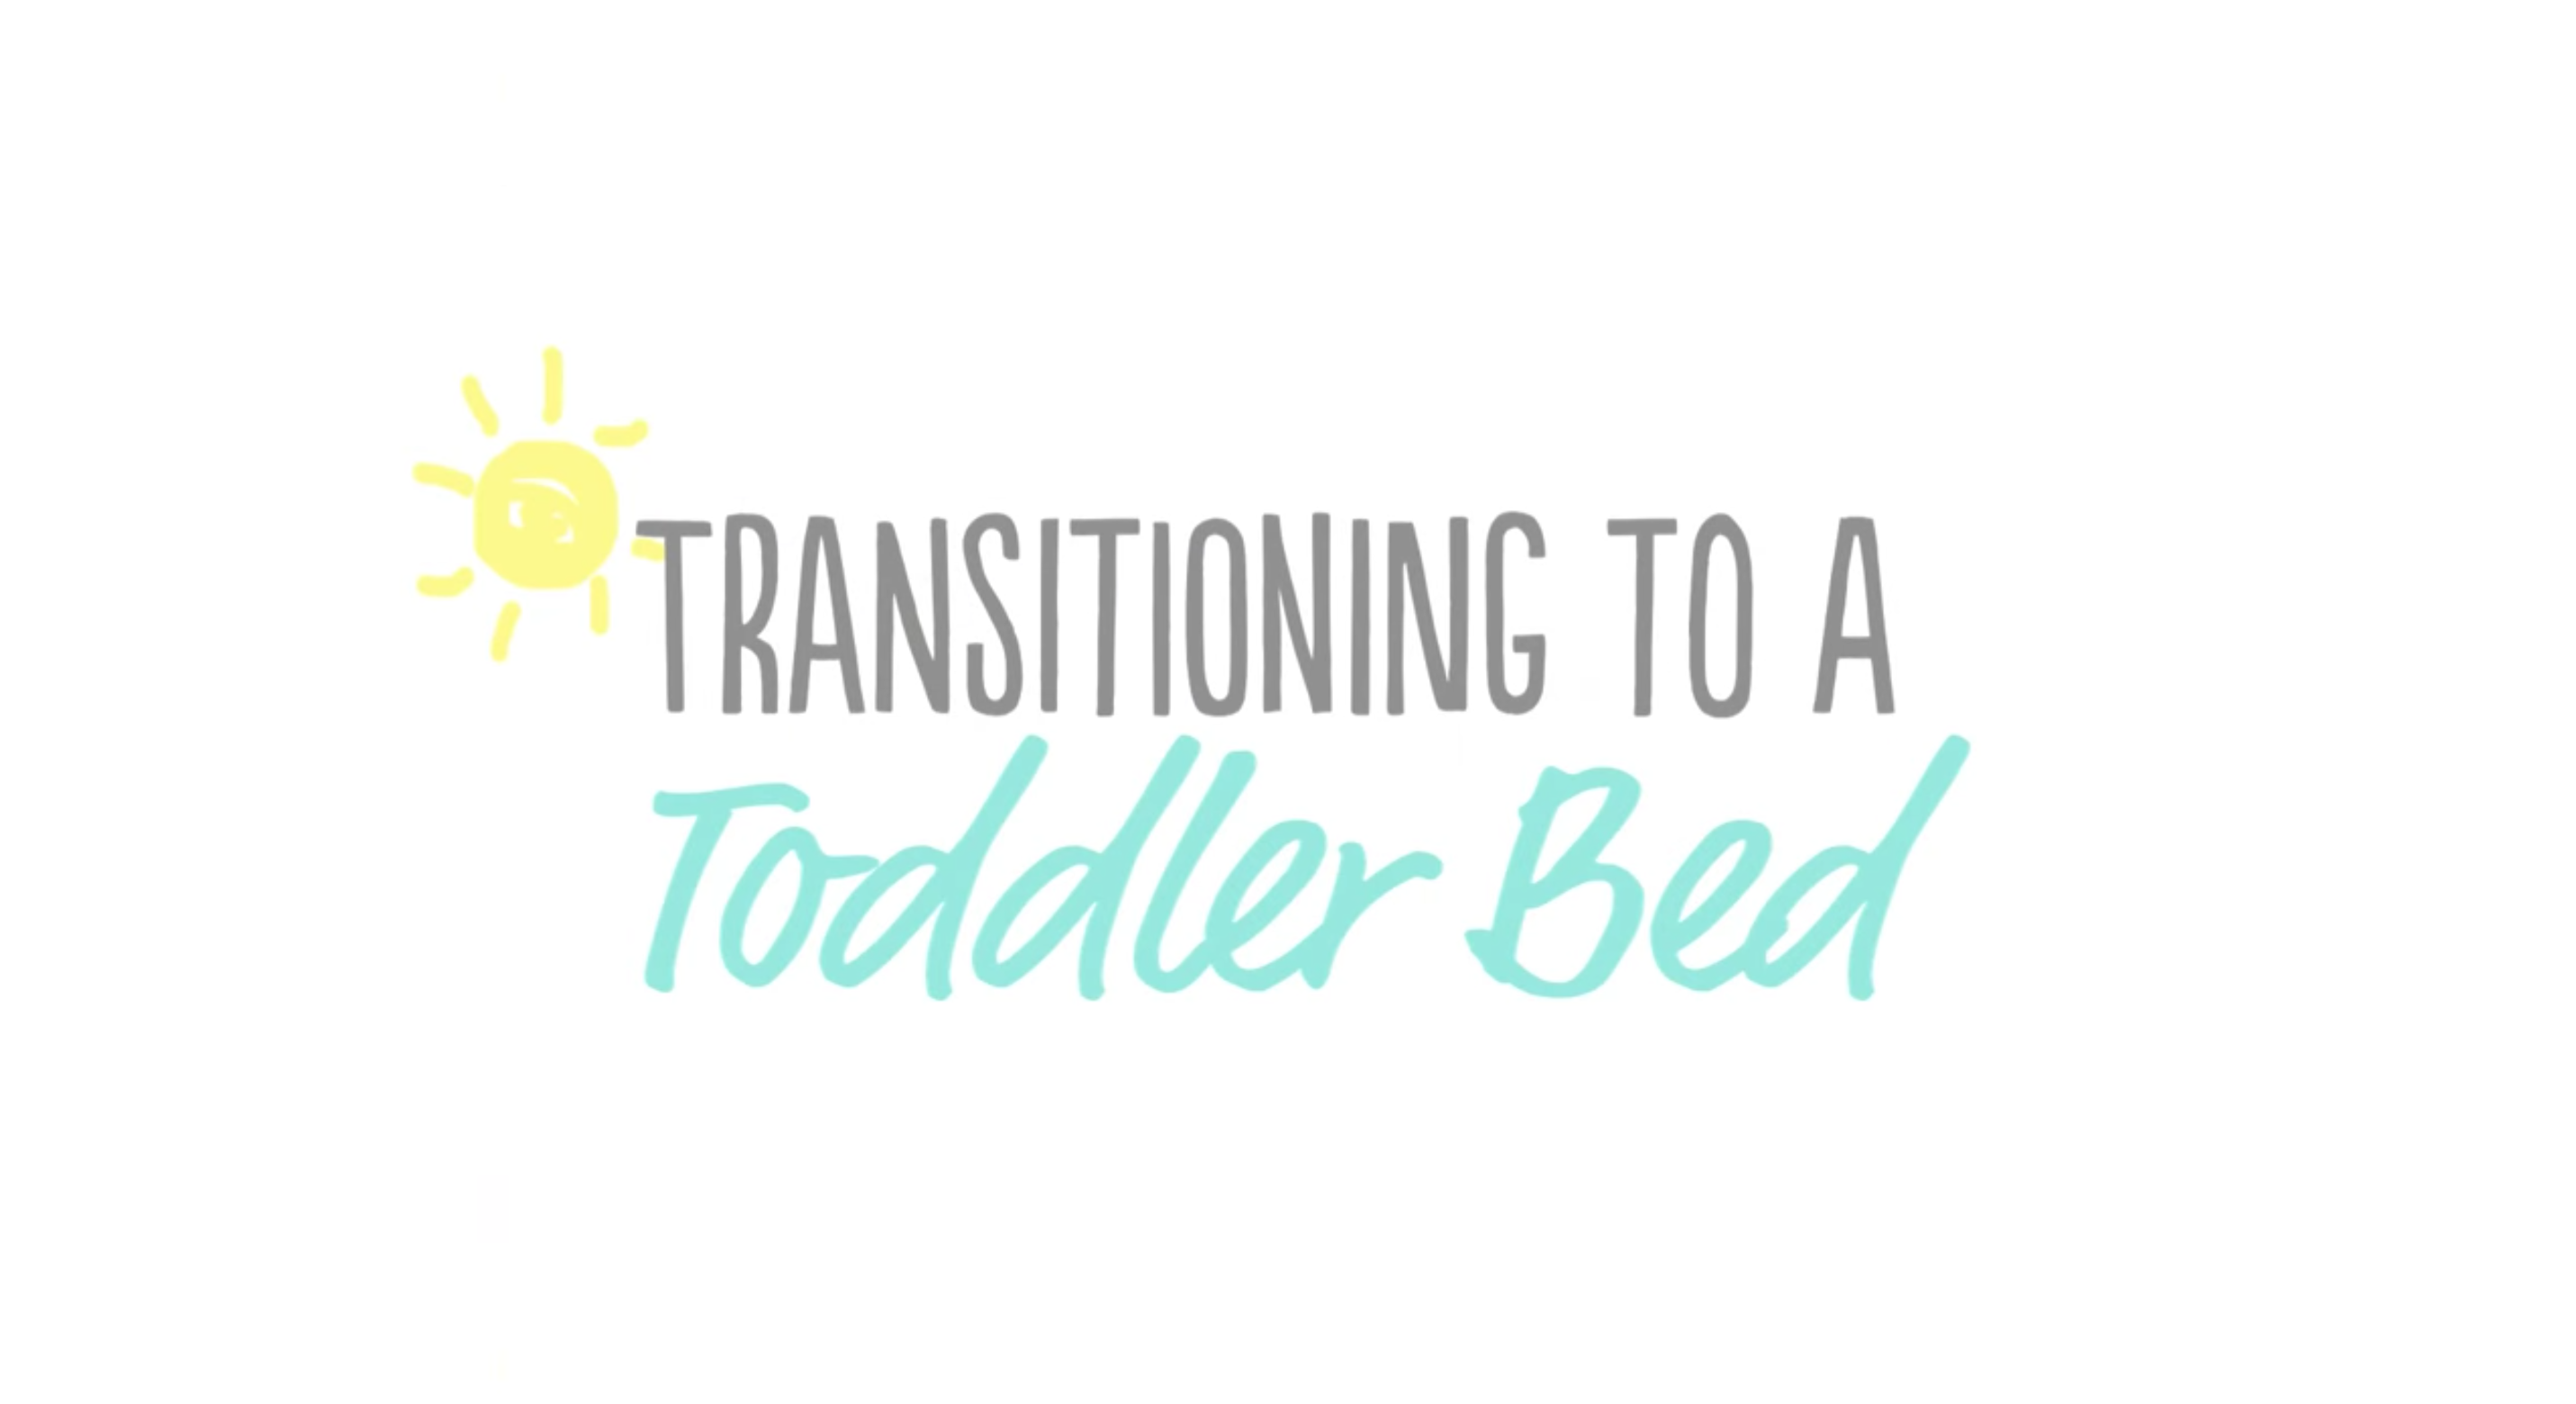 Transitioning your little one to toddler bed? Check out this video to teach you how to get your kid into their new bed. Parenting tips and tricks!